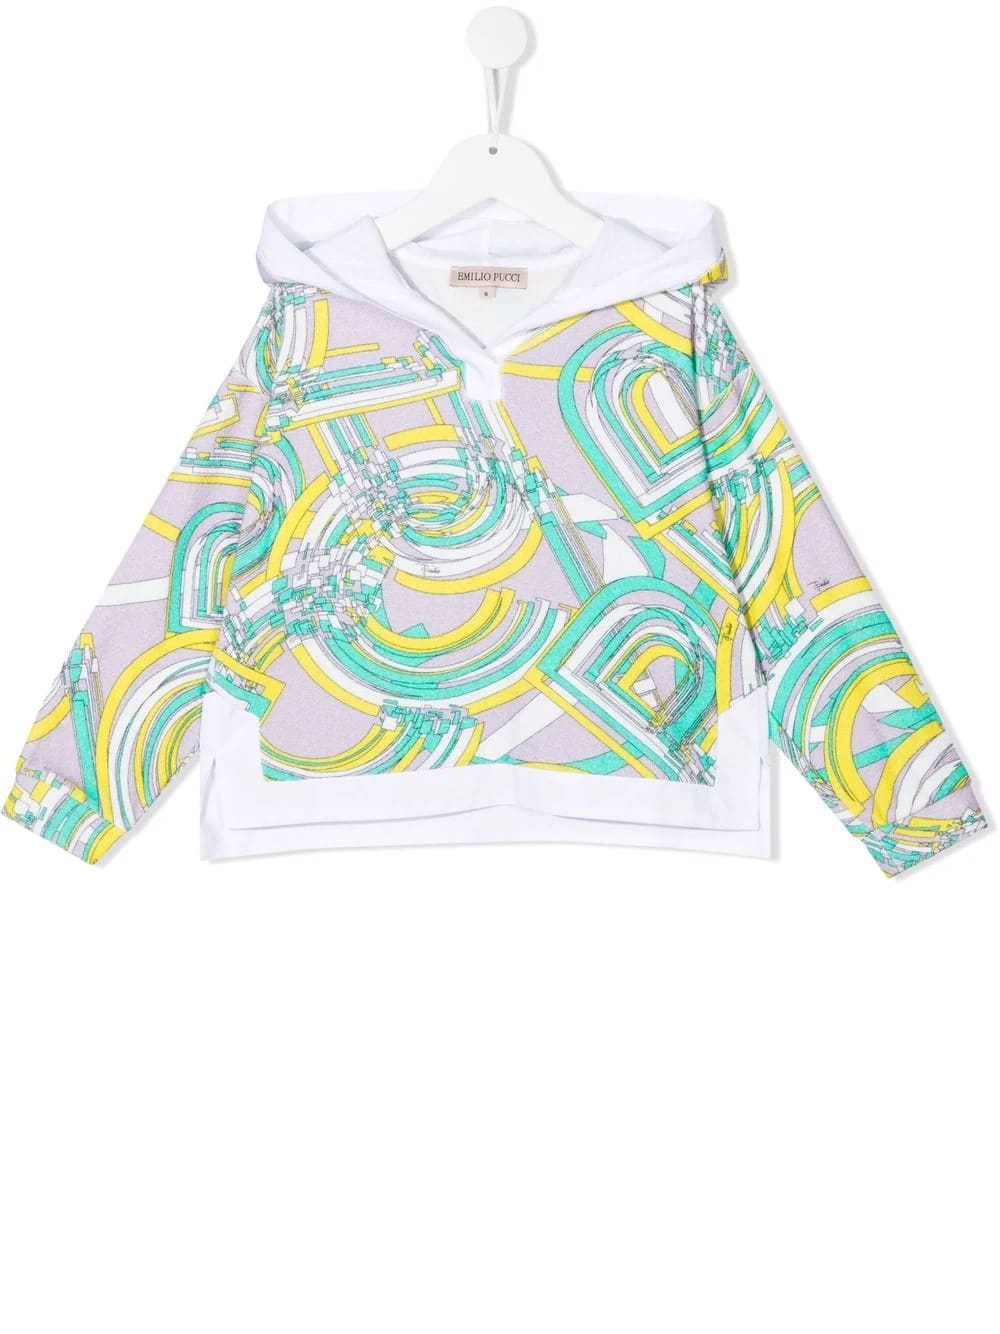 Emilio Pucci White Kids Hooodie With Printed Application